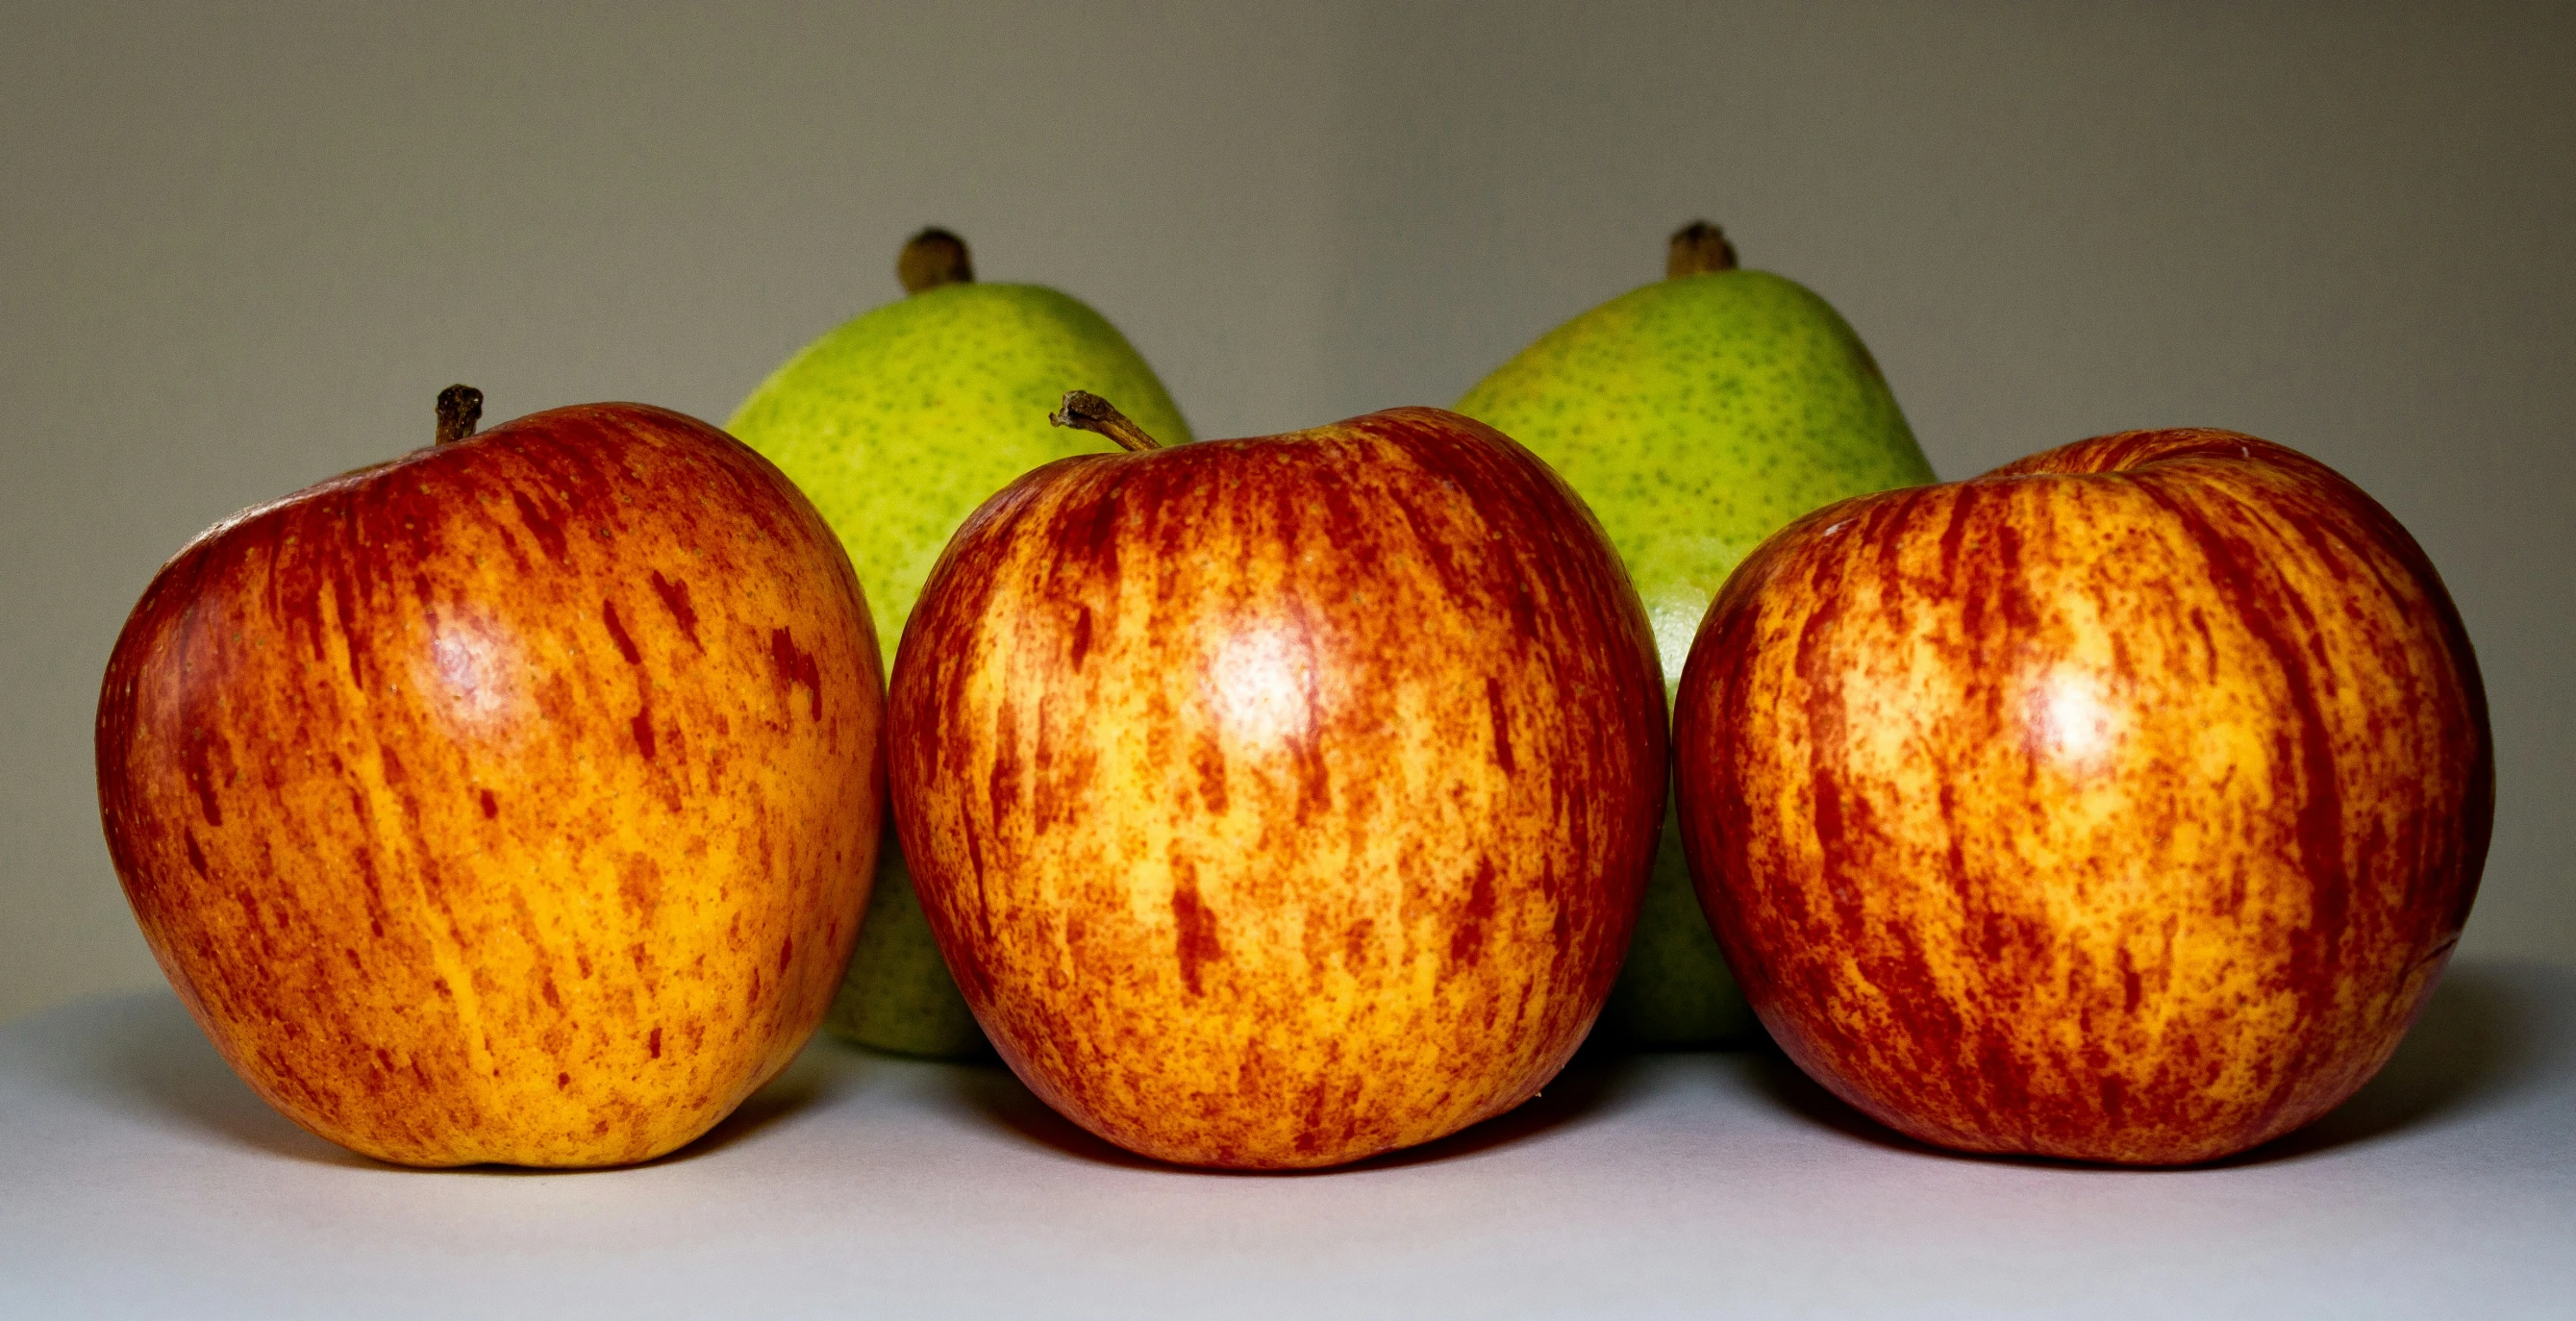 three apples are next to three green pears